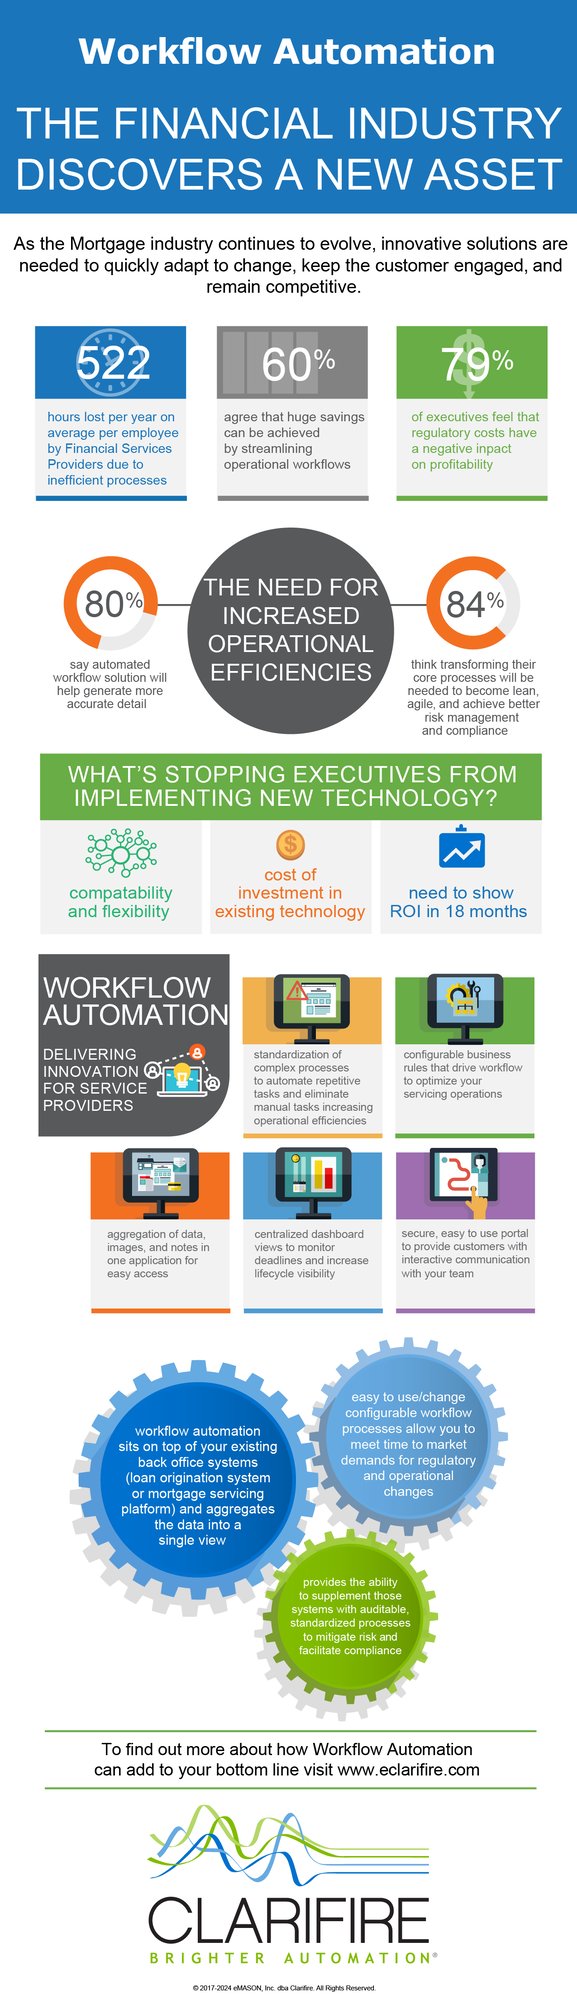 workflow-automation-infographic